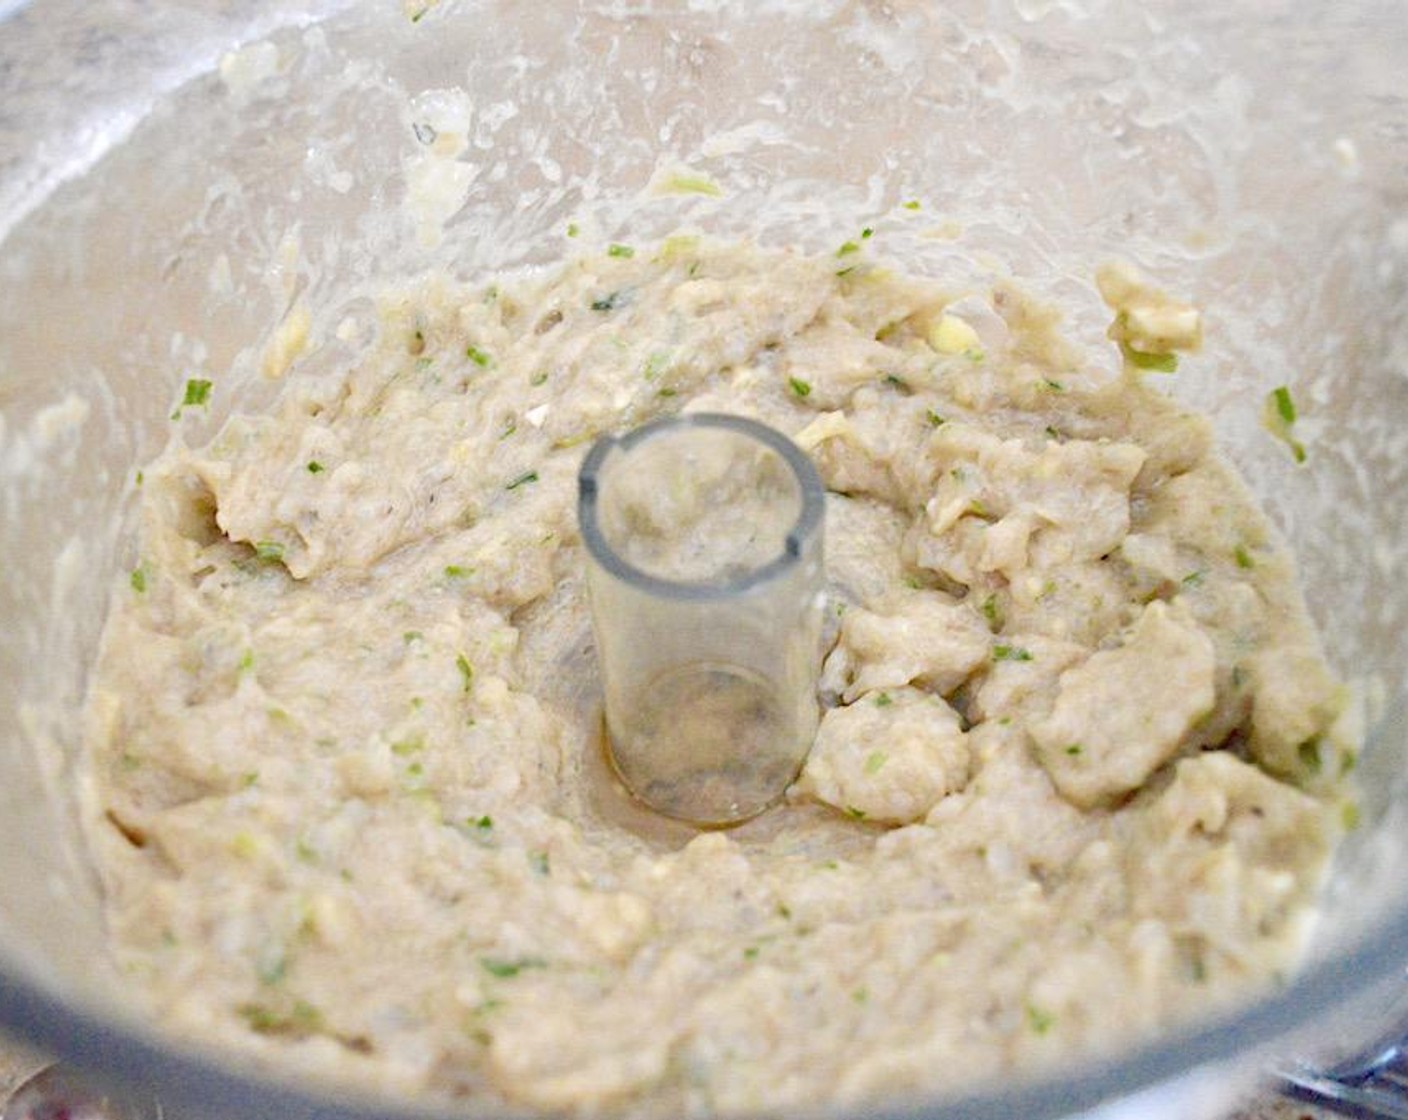 step 1 In a food processor, combine the Large Shrimp (1 lb), Fresh Ginger (1 1/2 Tbsp), Scallion (1 bunch), Soy Sauce (1/2 Tbsp), Sesame Oil (1/2 Tbsp), Eggs (2), and Corn Starch (1 Tbsp). Puree them all together until it is a smooth, thick filling.